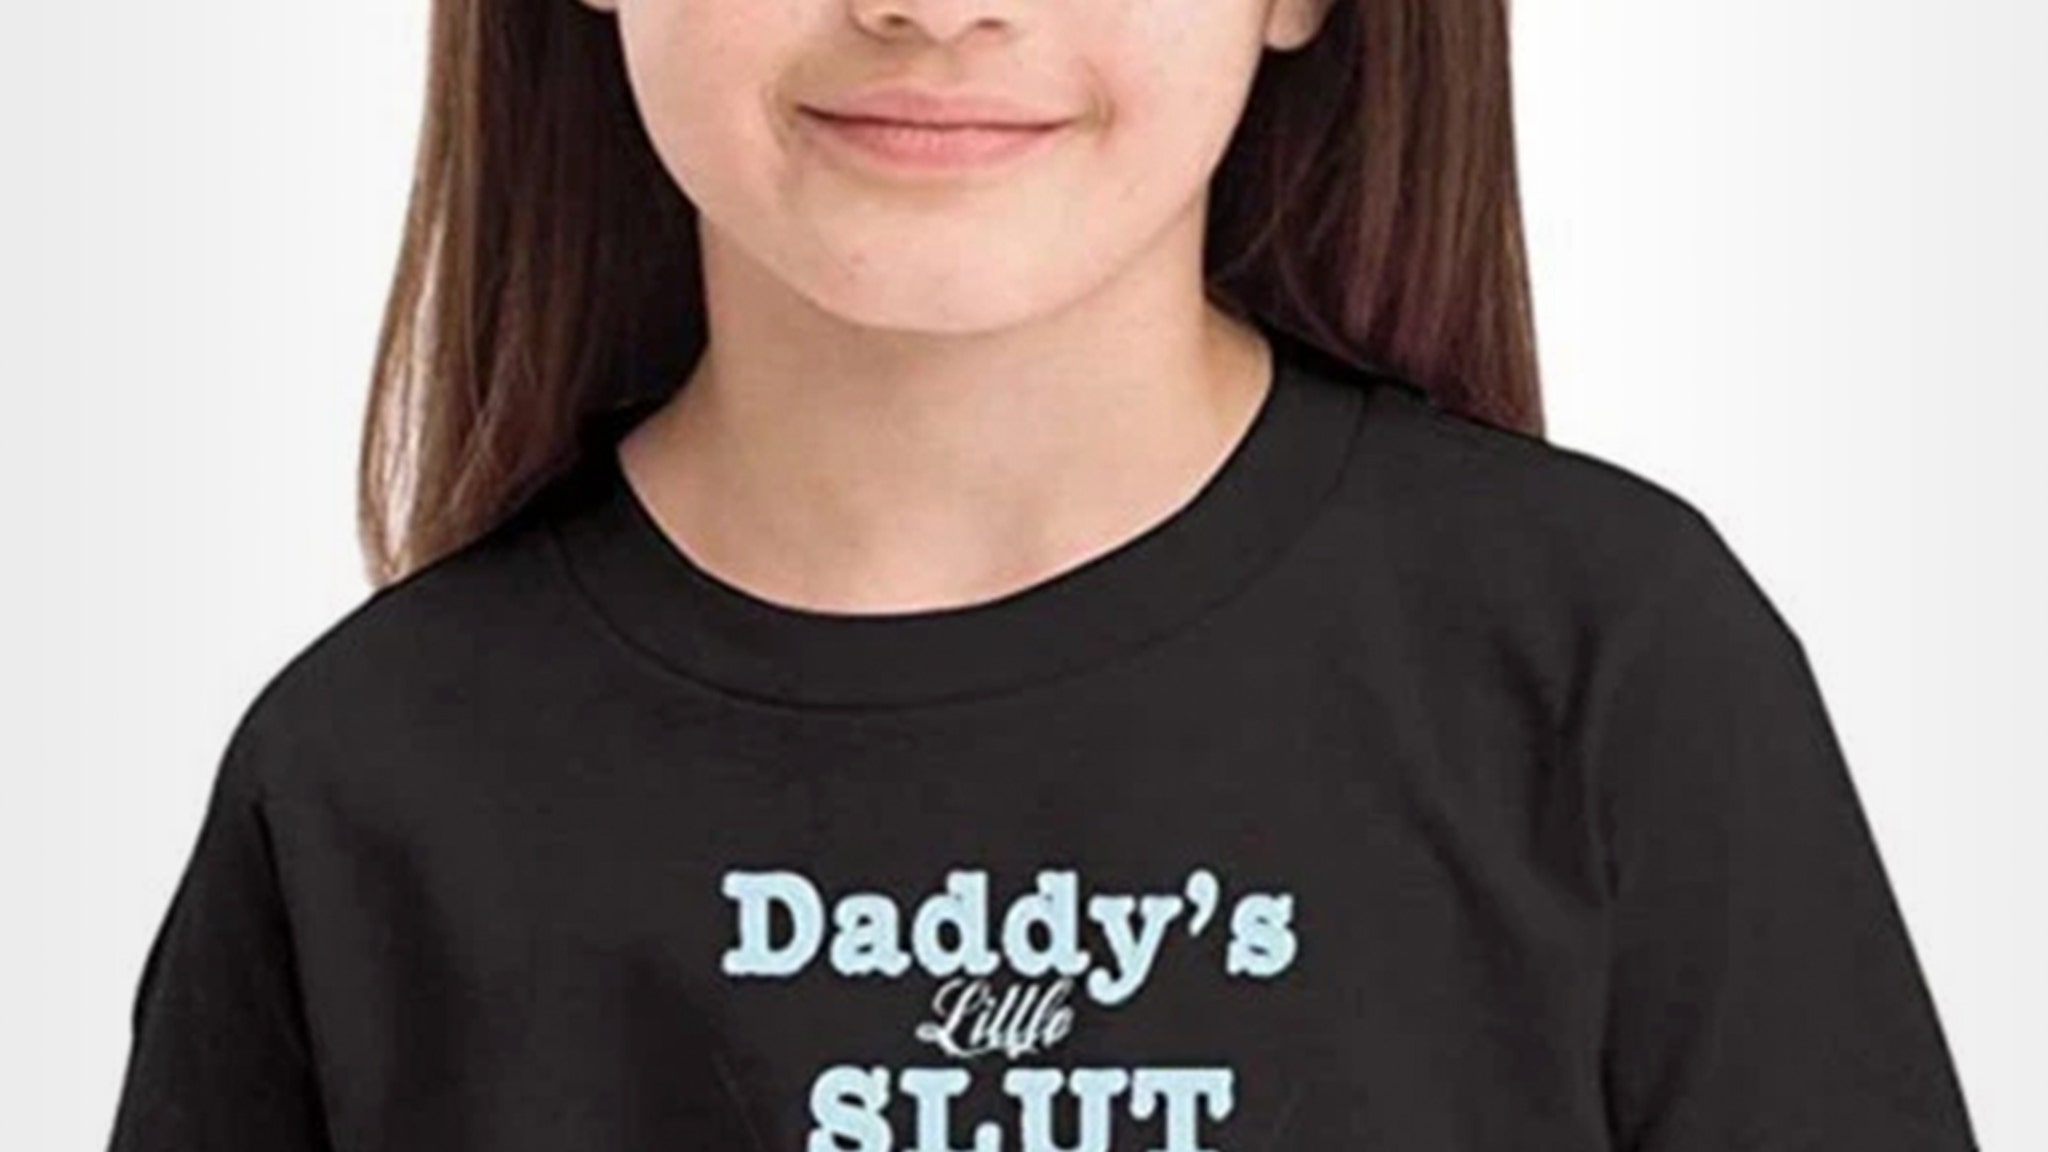 Daddy S Little Slut Shirt Yanked From Amazon After Uproar